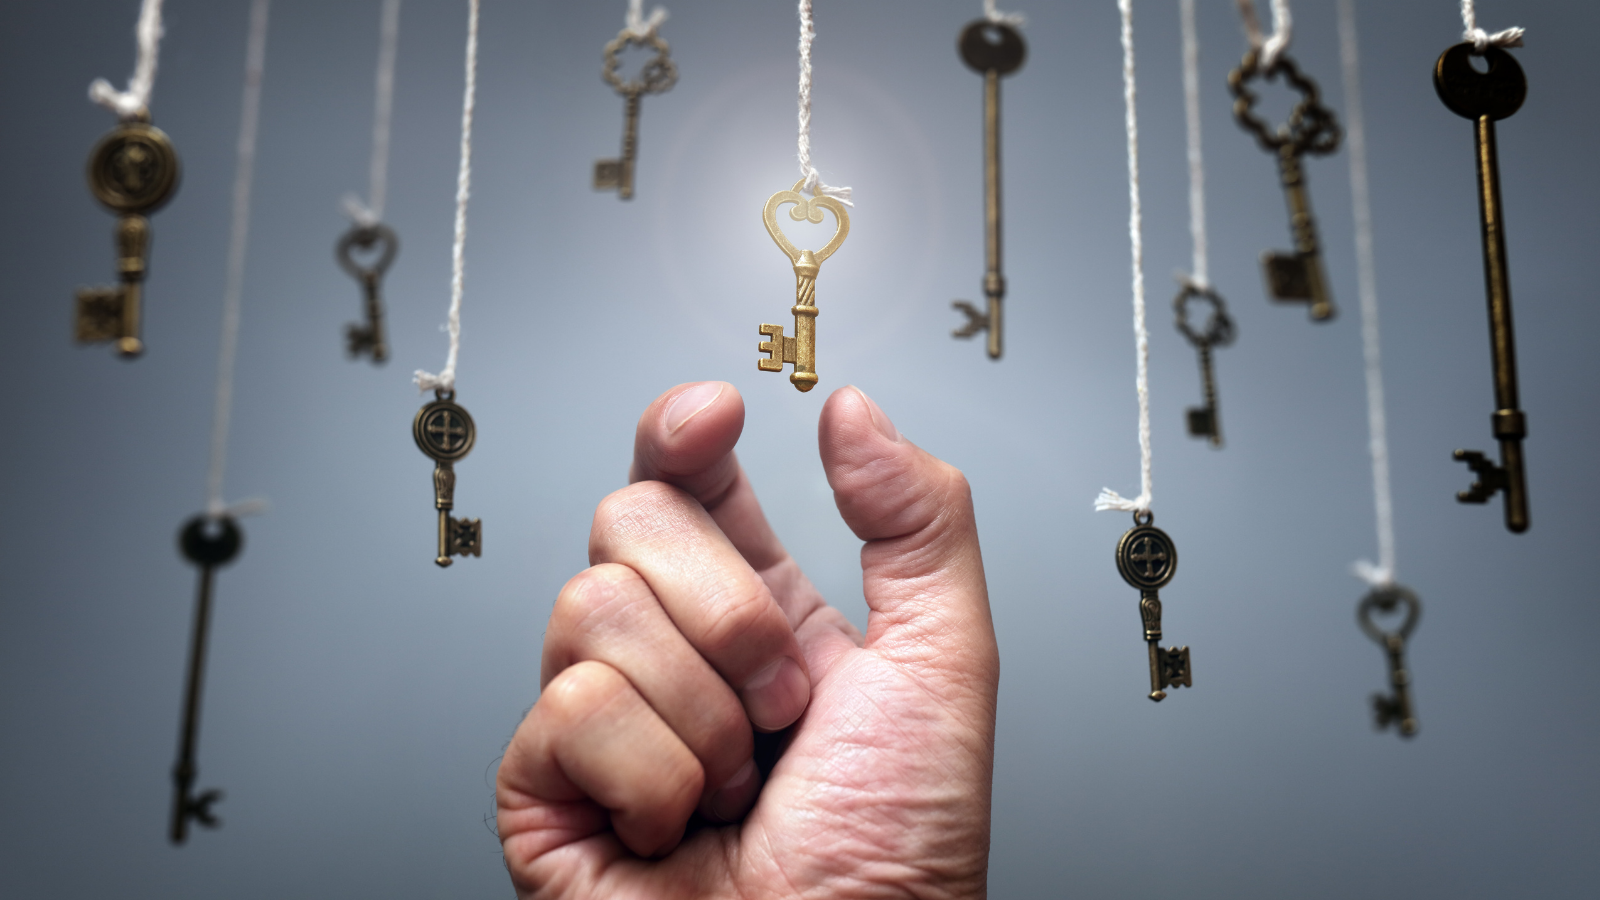 Man holding up a highlighted key in a ceiling full of various keys.